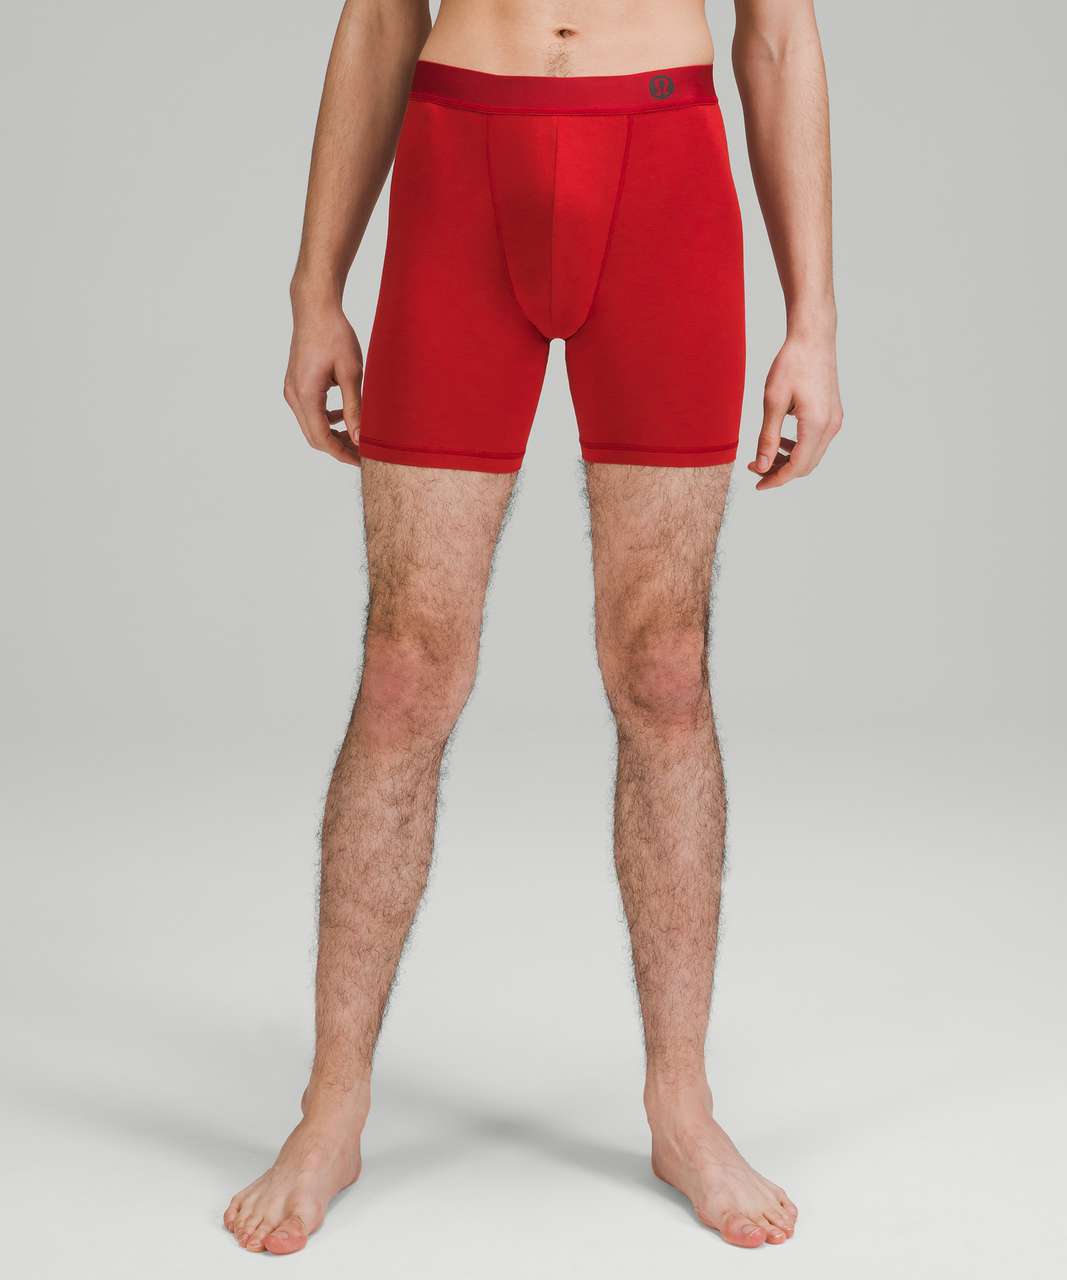 Lululemon Always In Motion Boxer 7" - Sport Red (First Release)